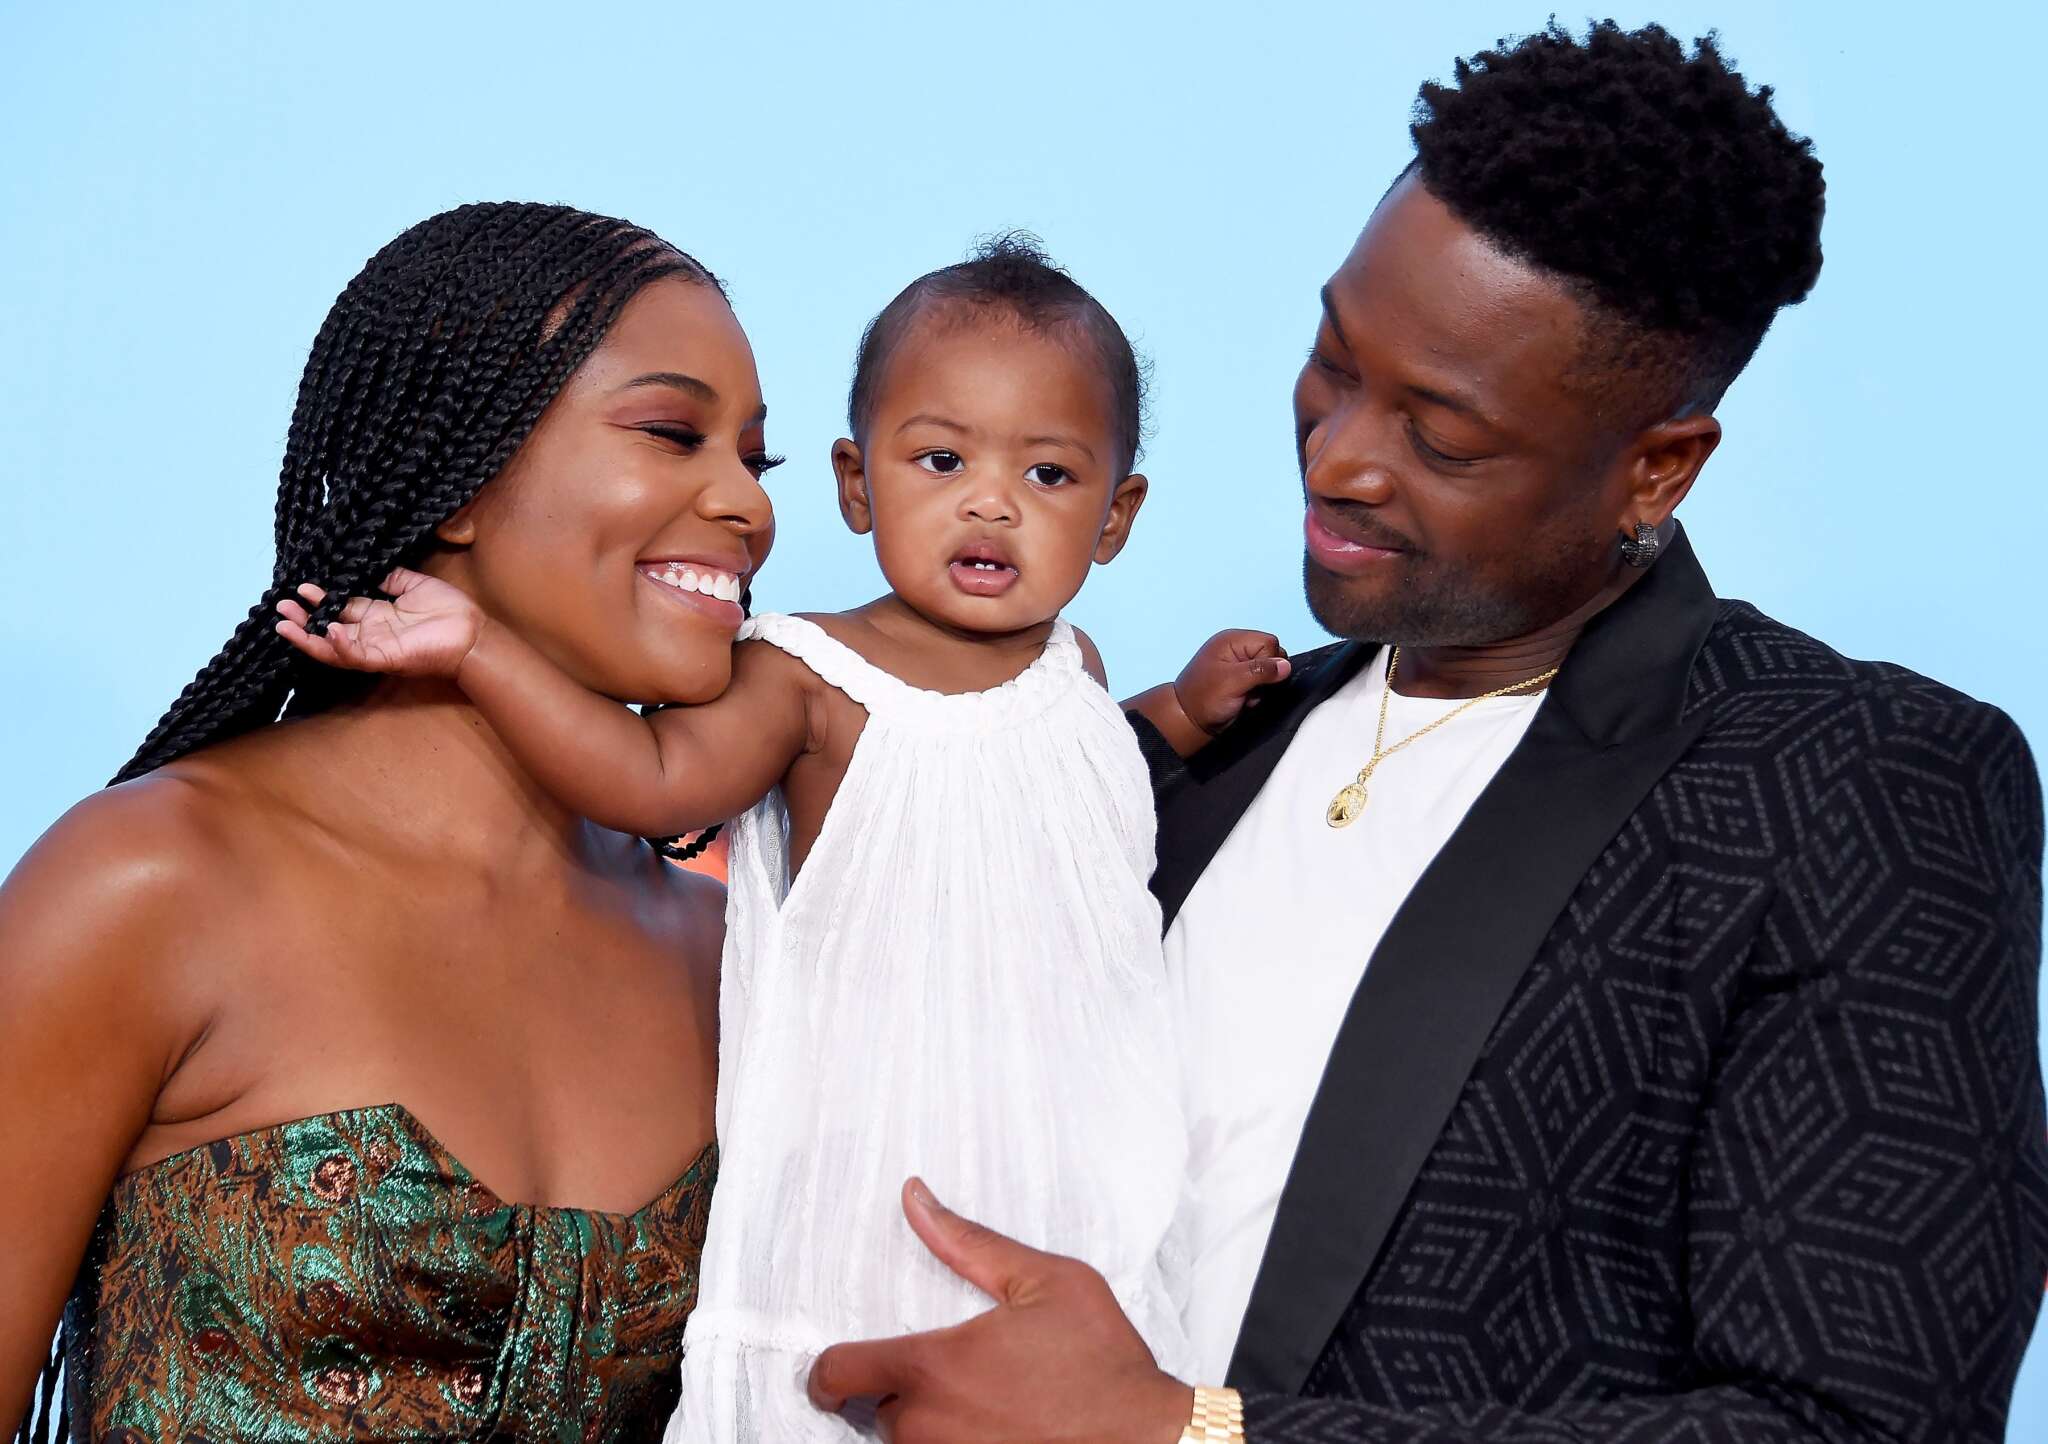 Gabrielle Union's Video Featuring Kaavia James And Her Playdate Has Fans In Awe